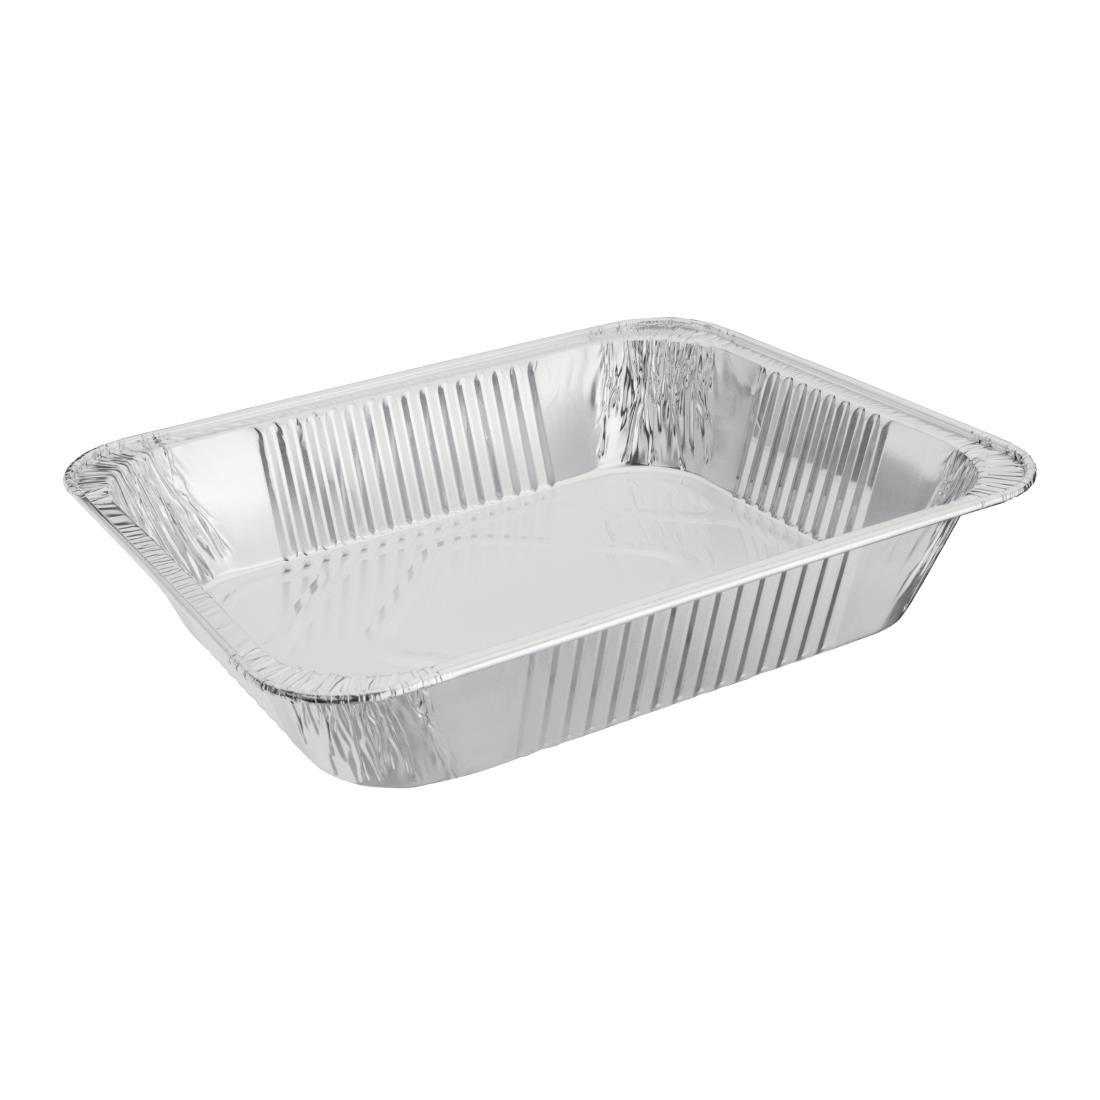 Fiesta Foil 1/2 Gastronorm Containers (Pack of 5)